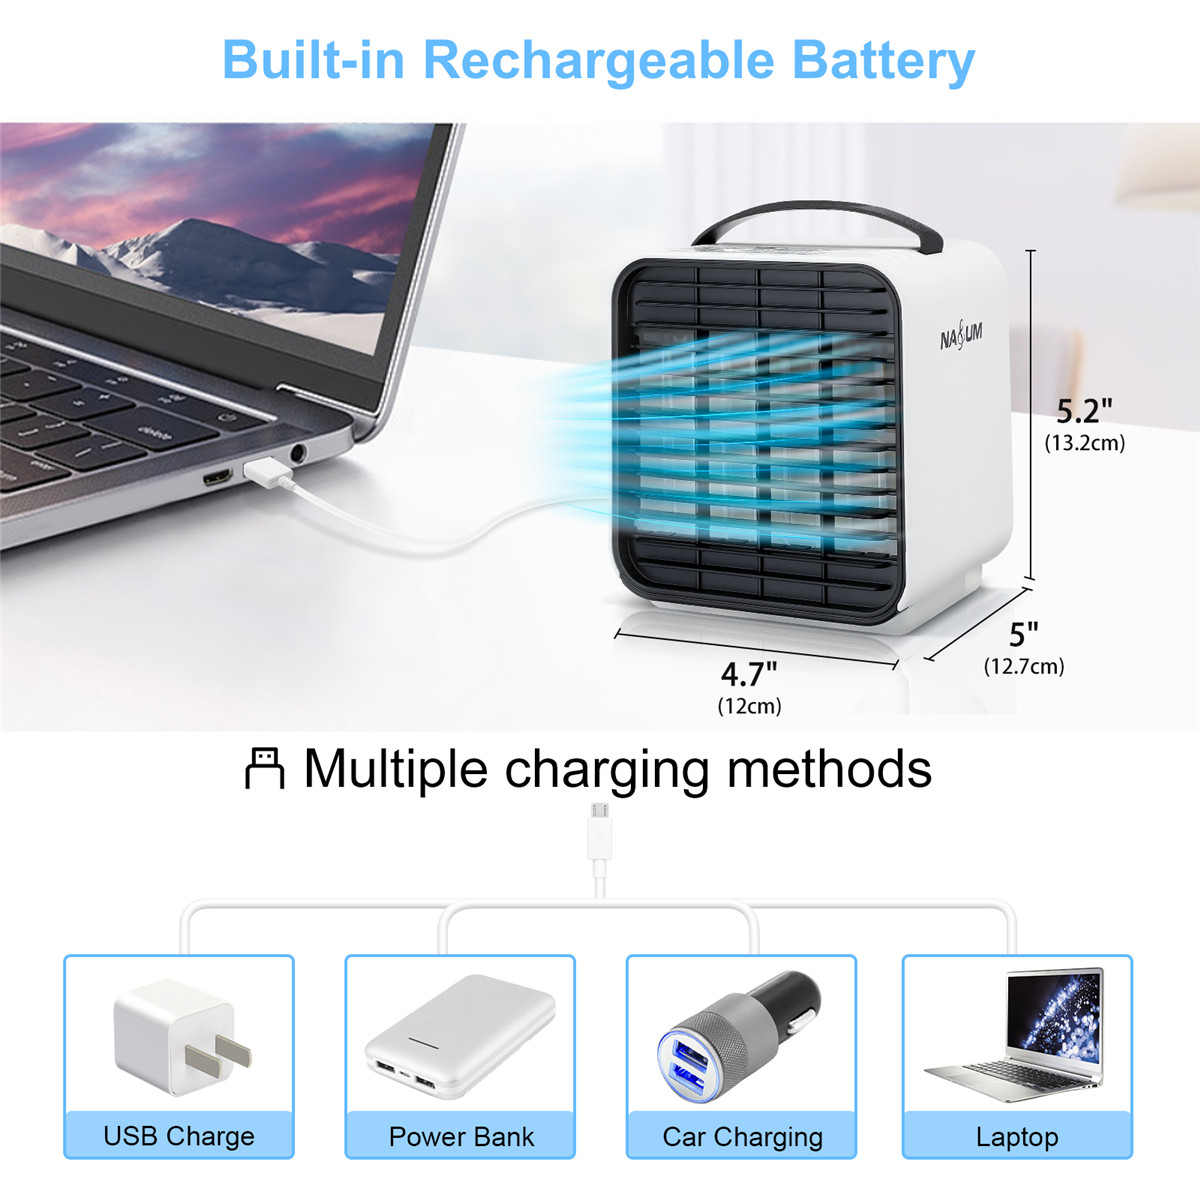 4-in-1 Mini Air Cooler Portable USB Air-Conditioning 2000mAh Cooling Fan 3 Wind Speed Adjustment Night Light for Home Office